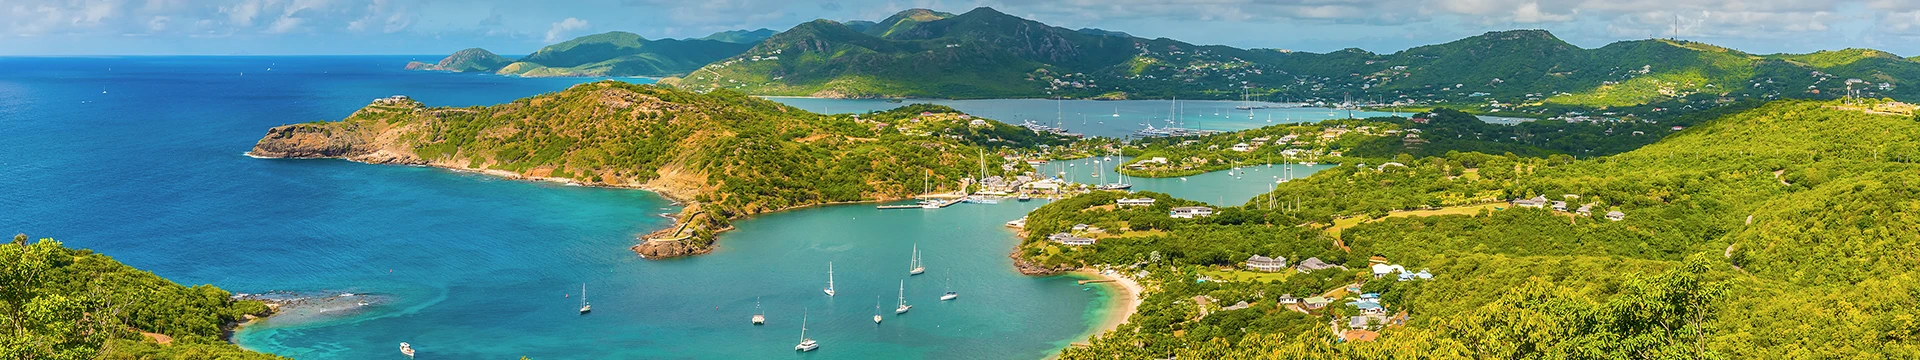 Hotels in Antigua and Barbuda